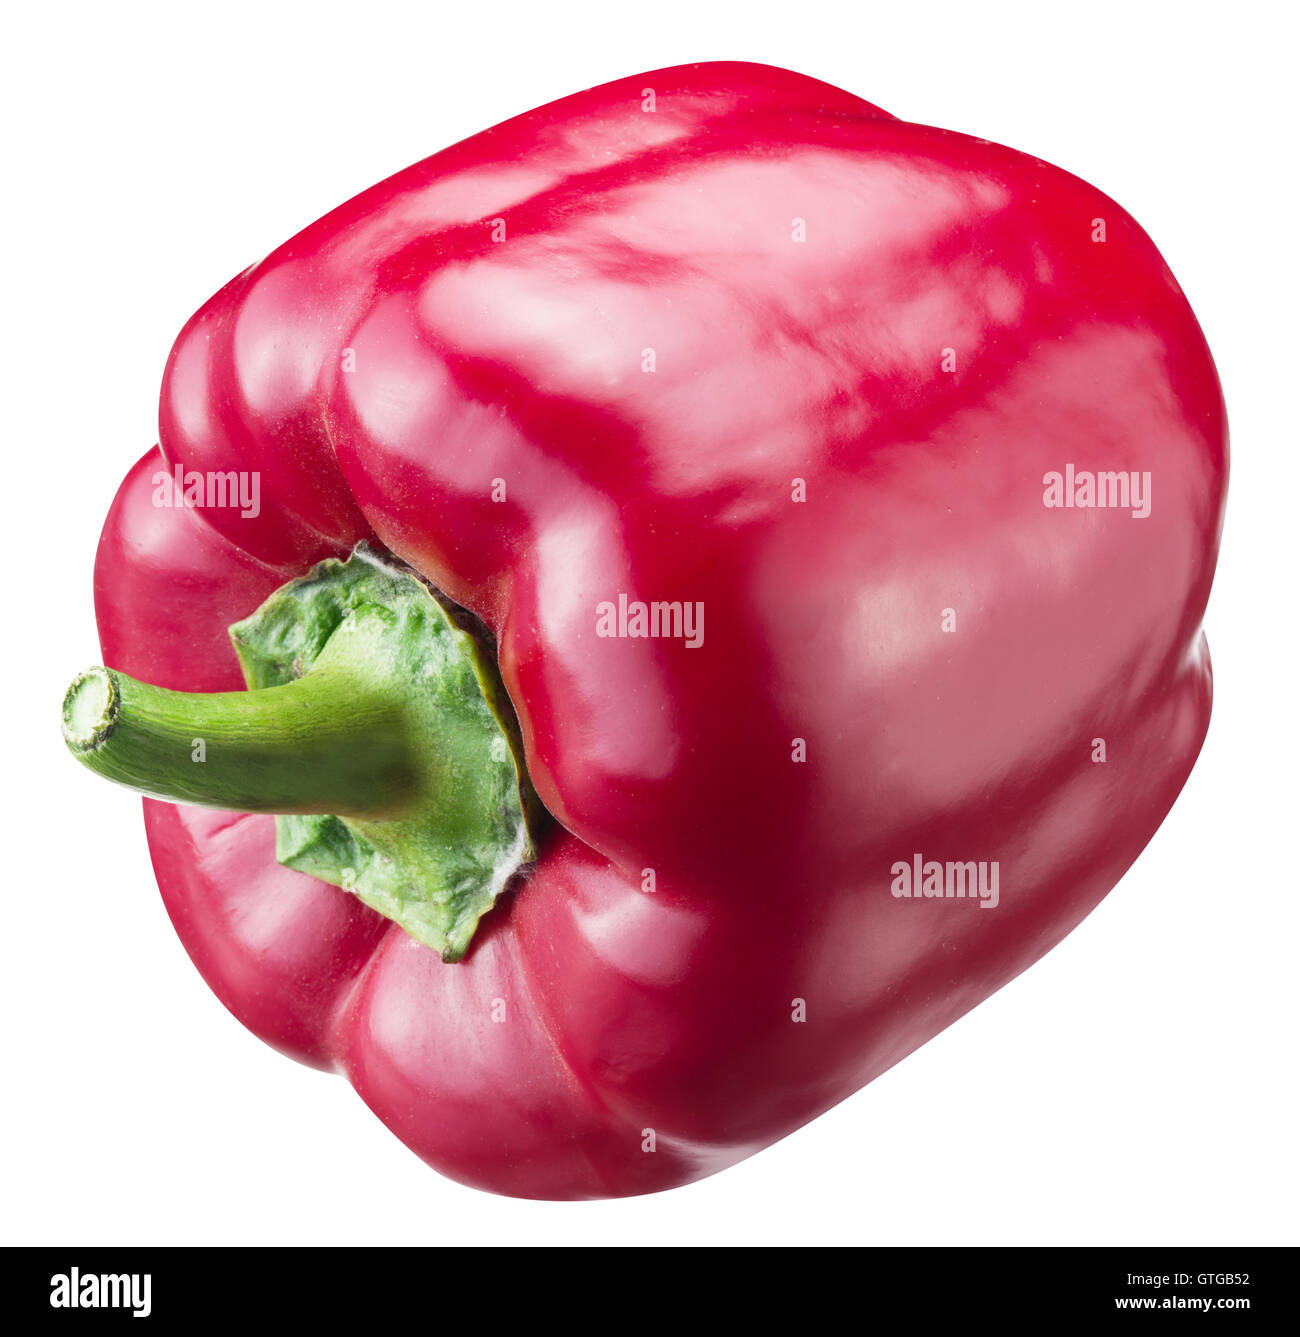 Red pepper isolated on white background.File contains clipping paths. Stock Photo